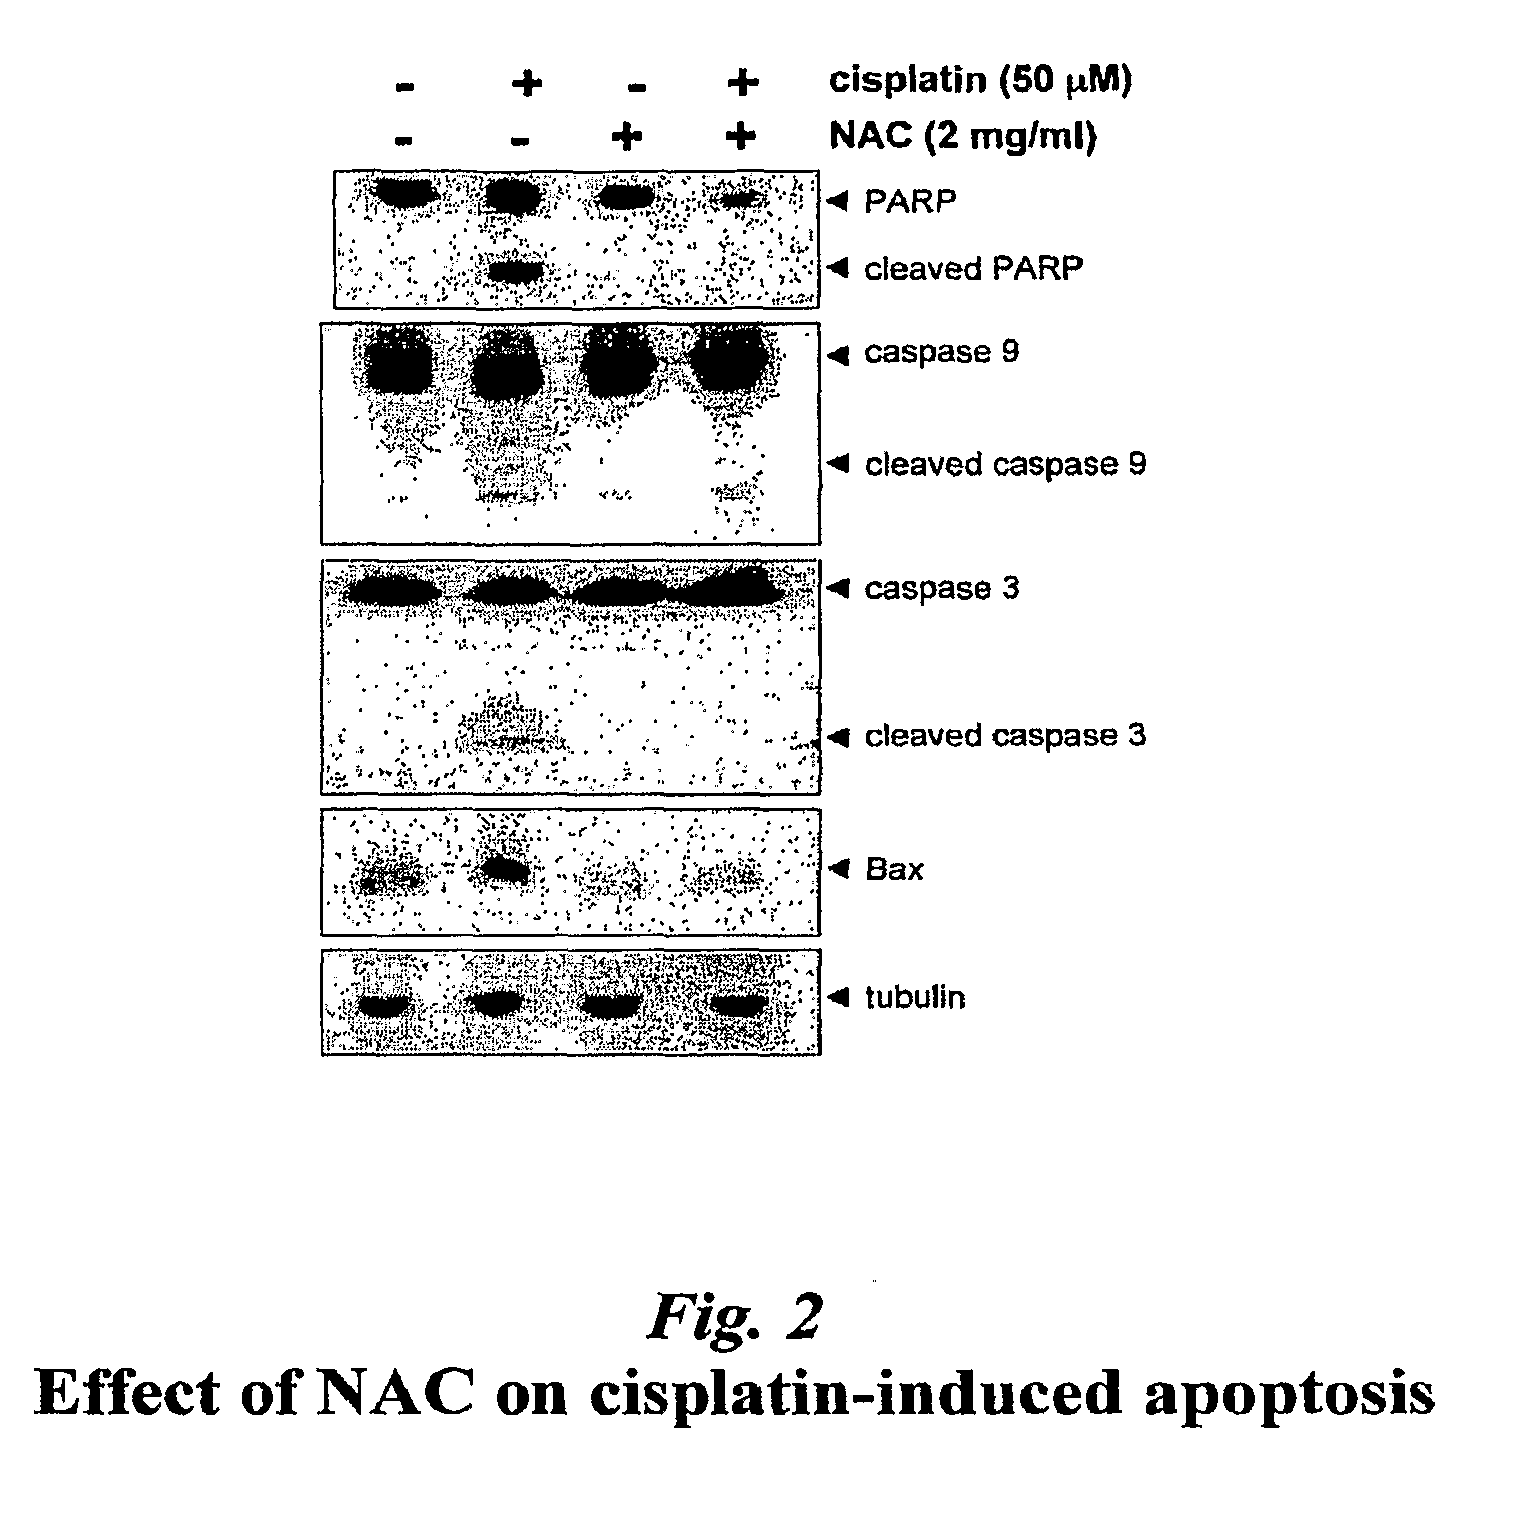 Methods for reducing toxicities associated with medical procedures employing radiographic contrast agents